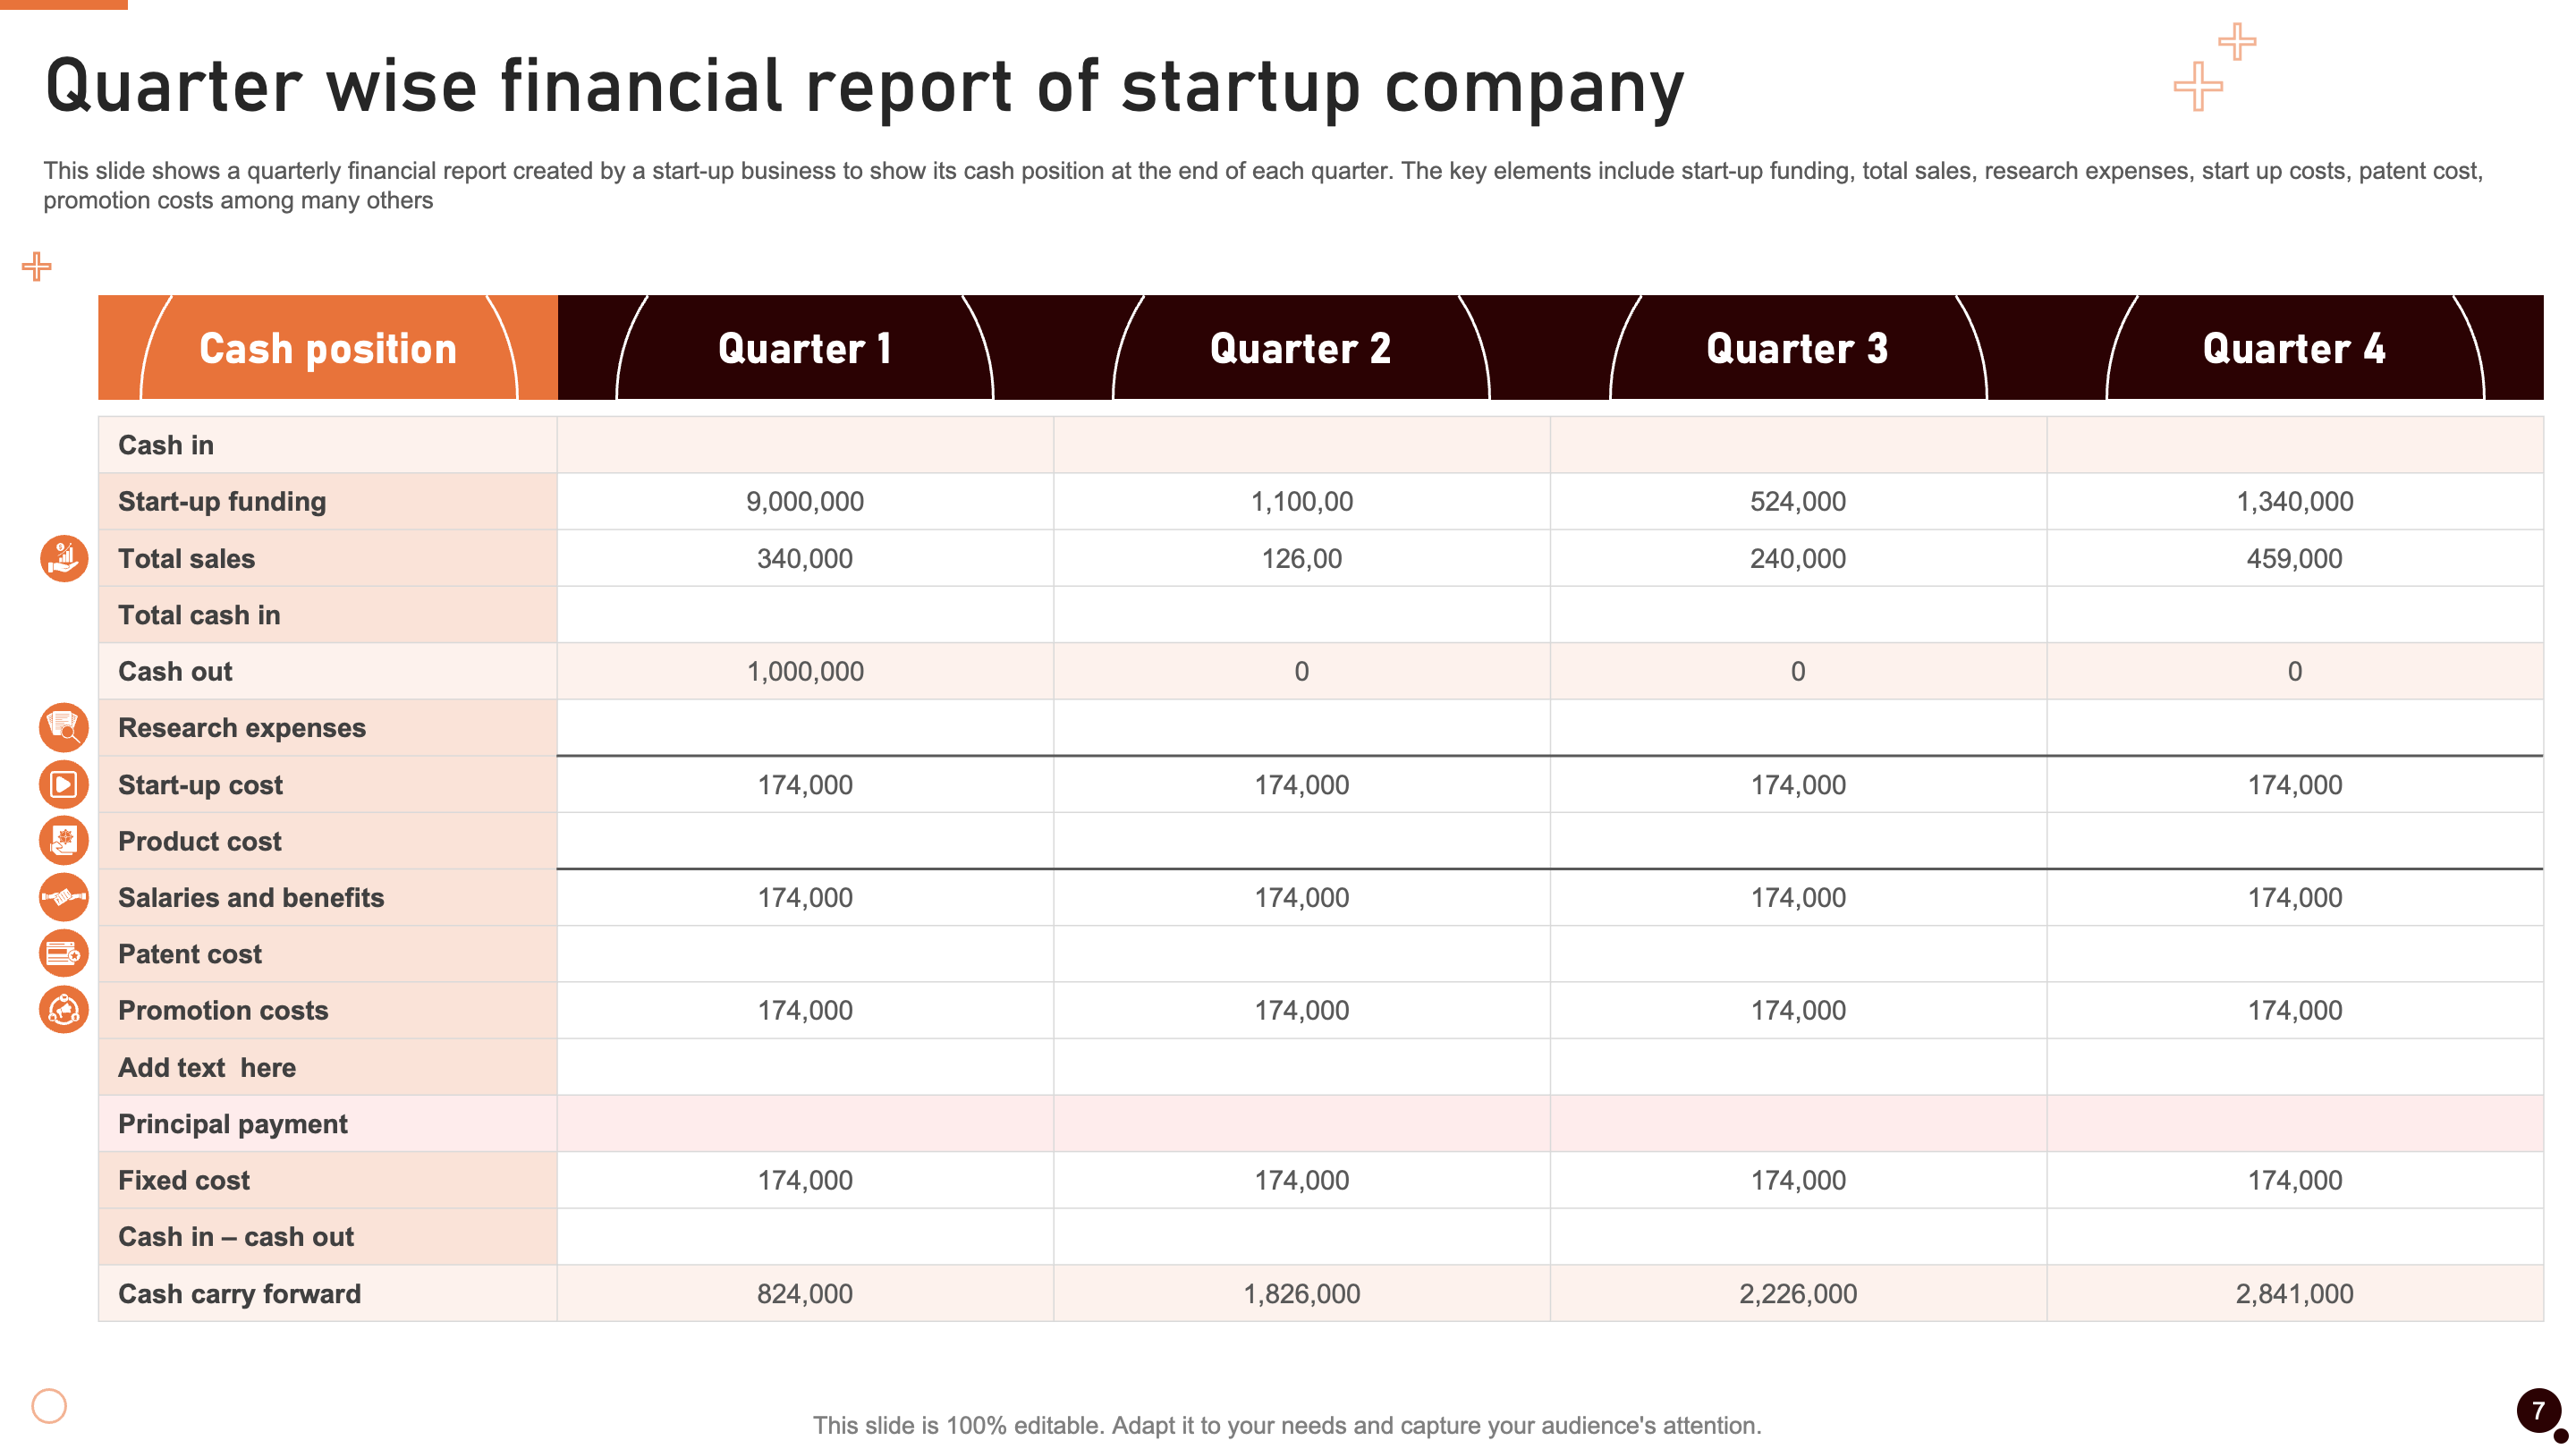 Quarter Wise Financial Report of Startup Company